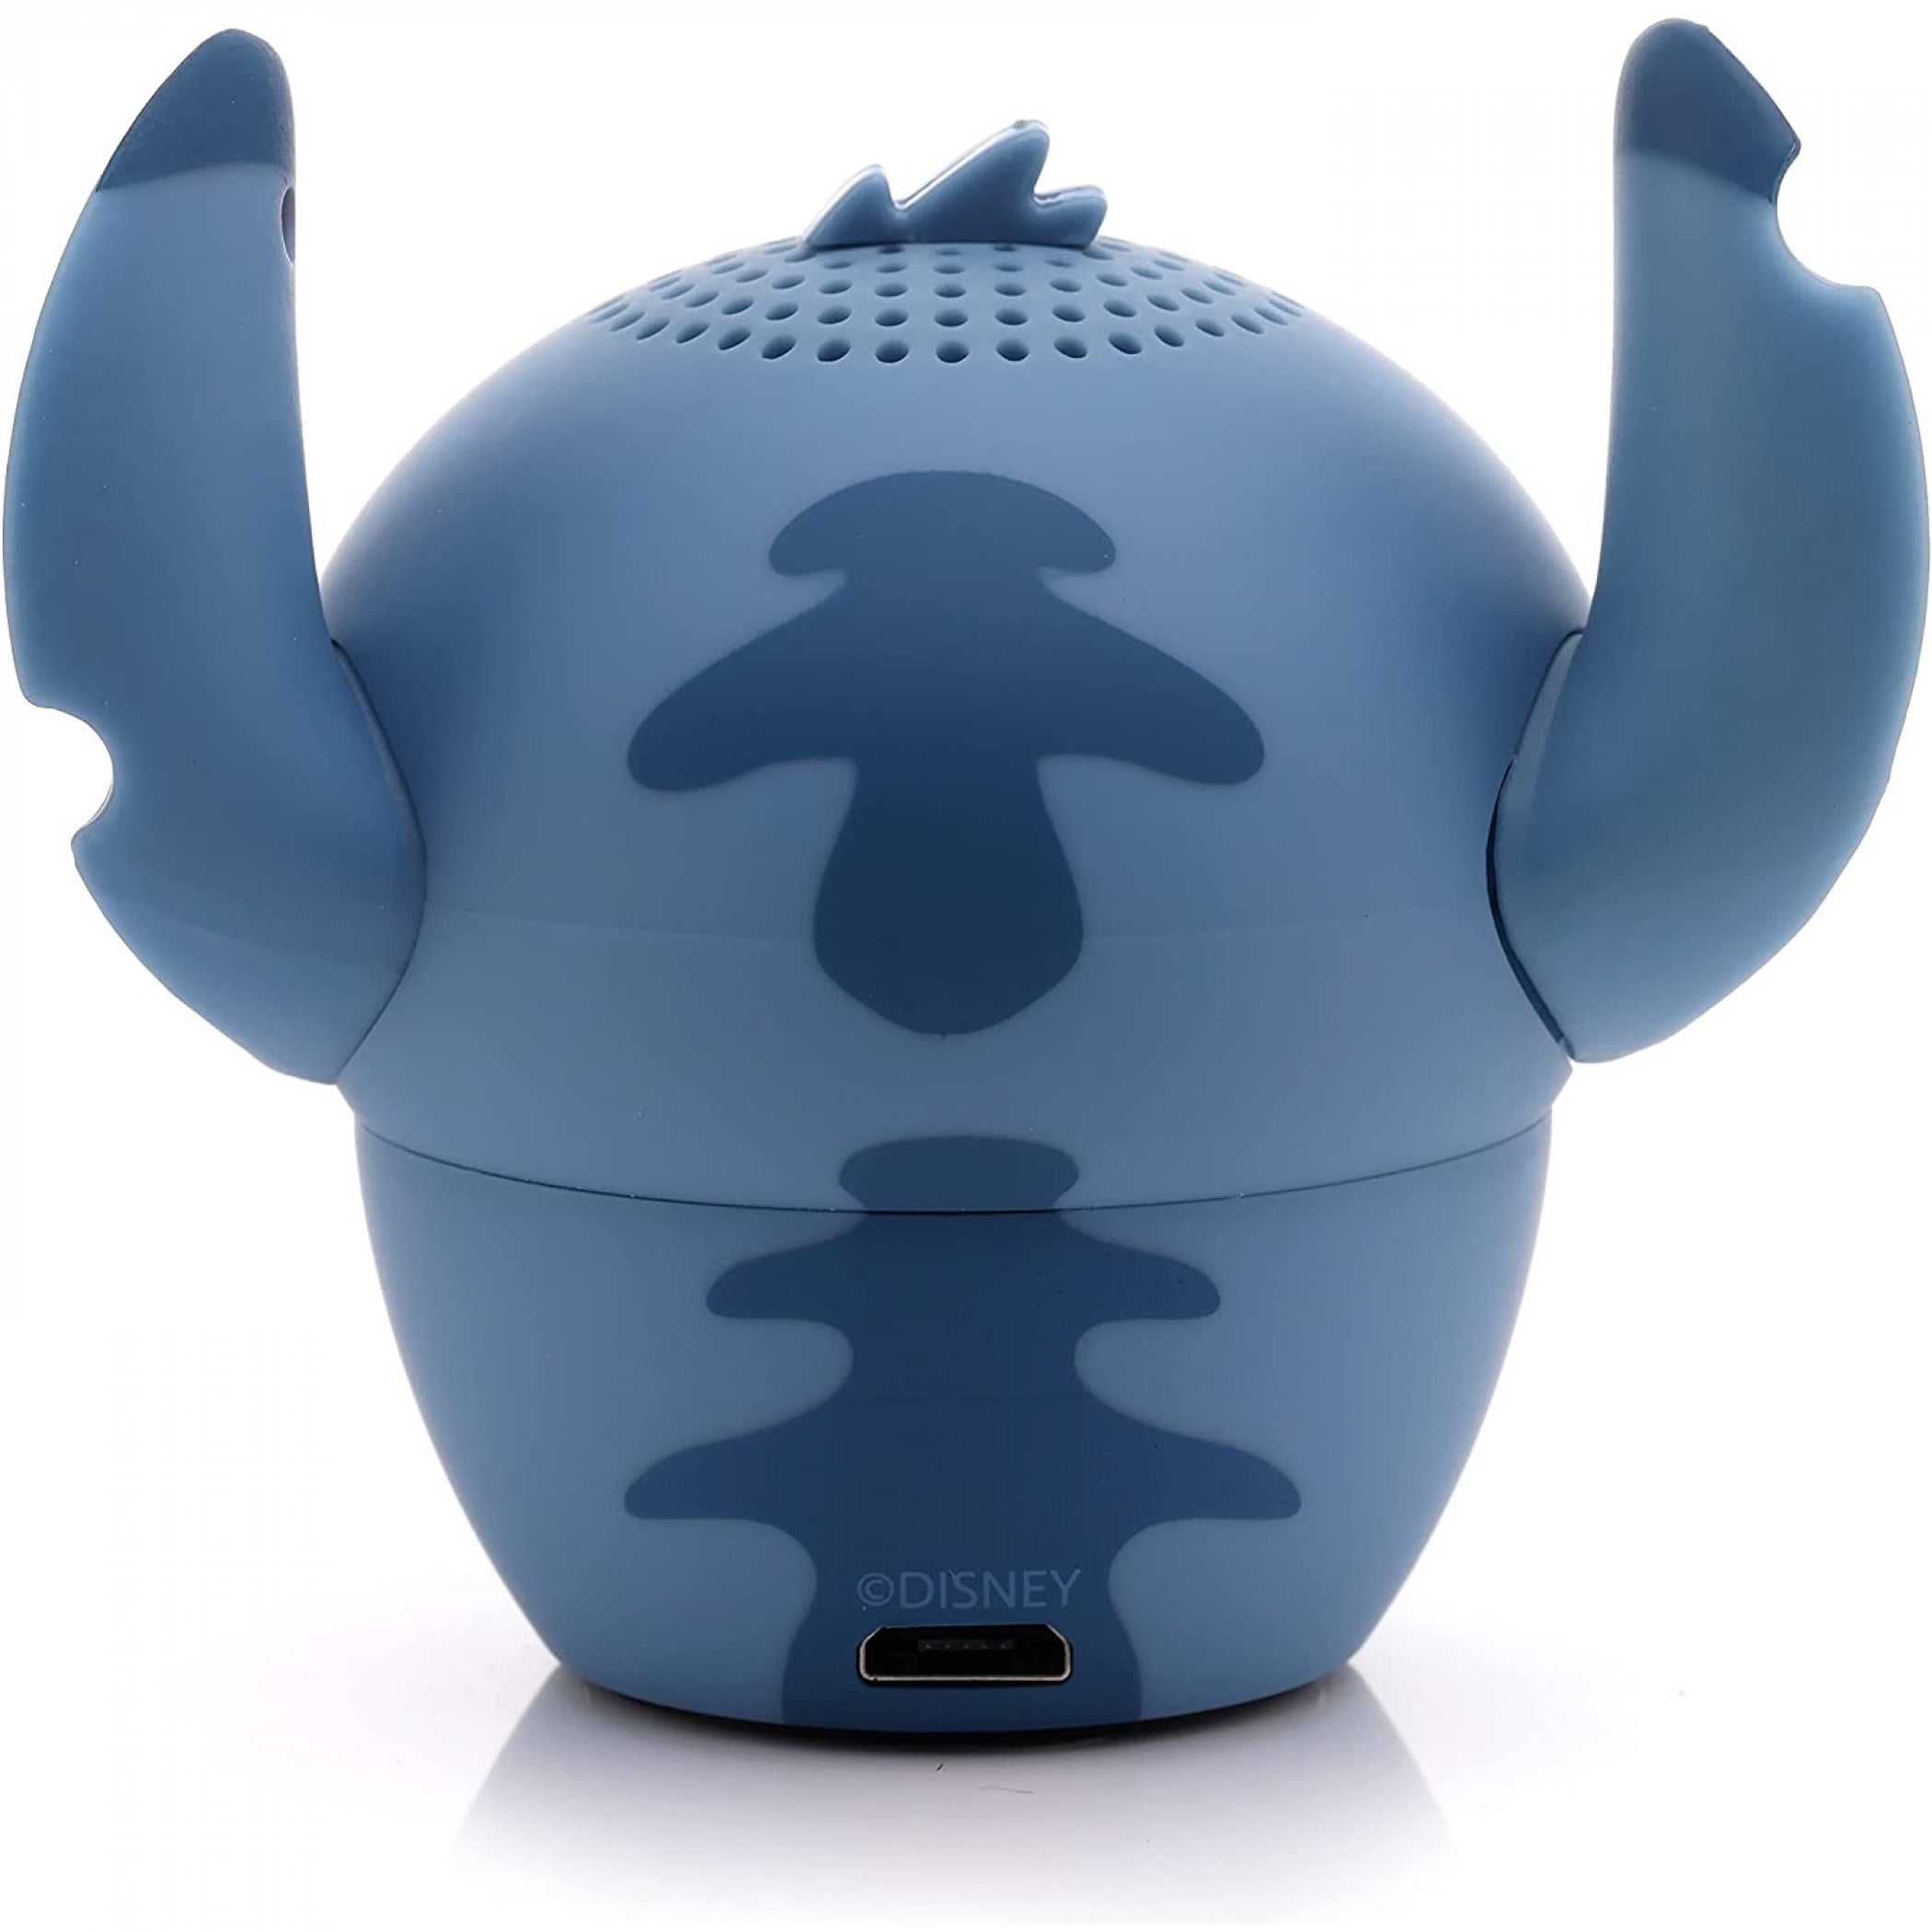 iJoy Disney Lilo and Stitch Bluetooth Shower Speaker with Suction